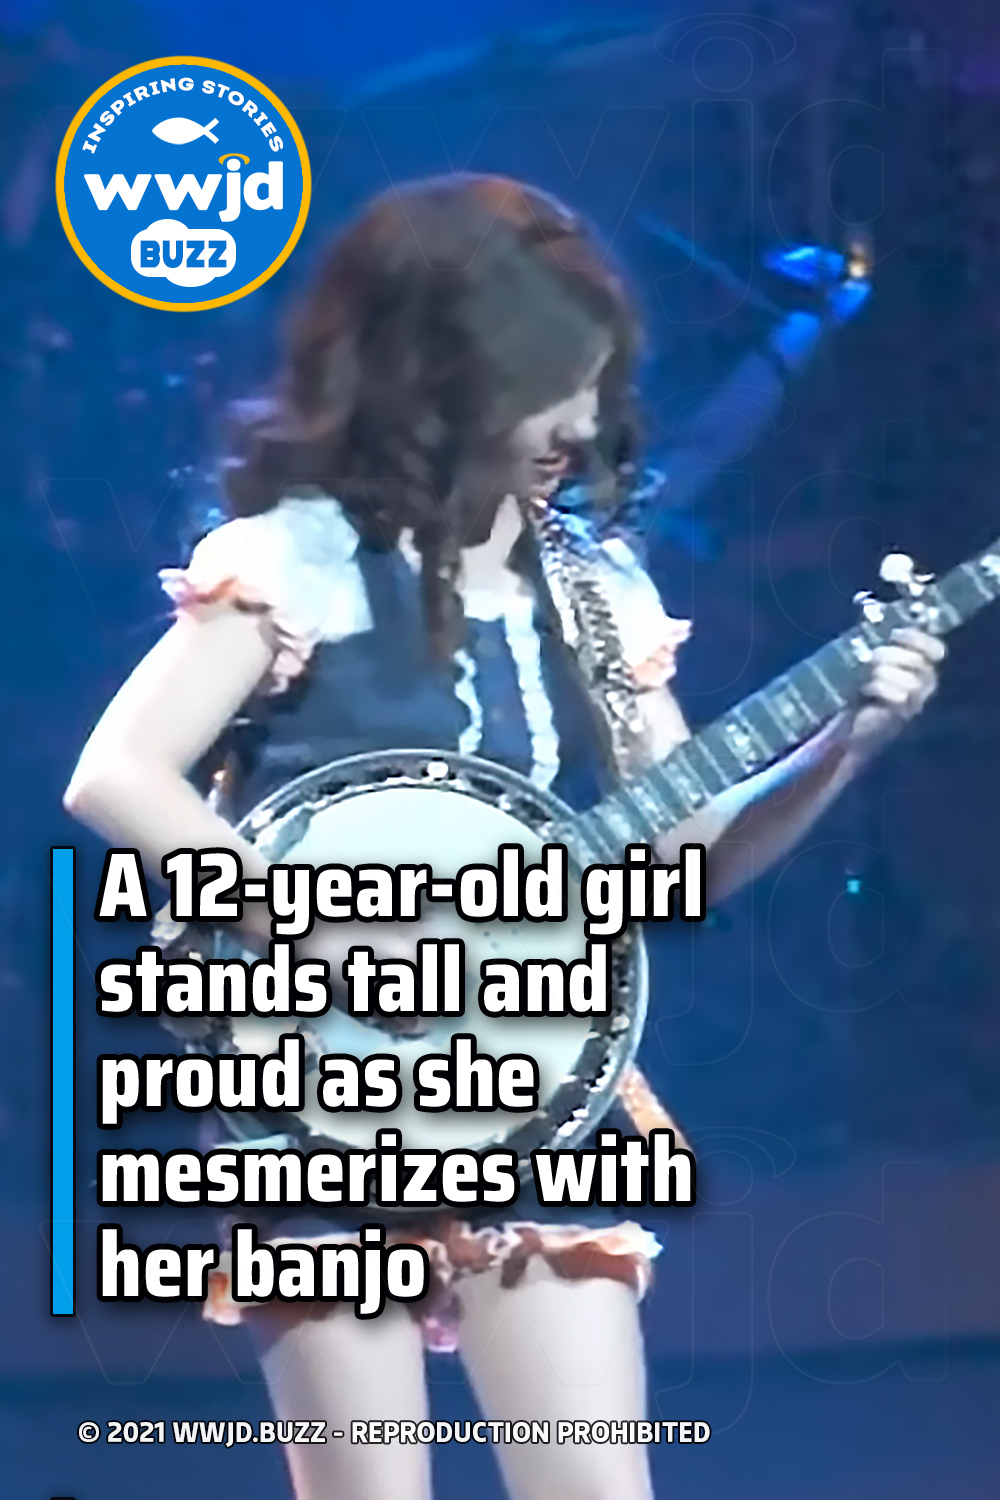 A 12-year-old girl stands tall and proud as she mesmerizes with her banjo